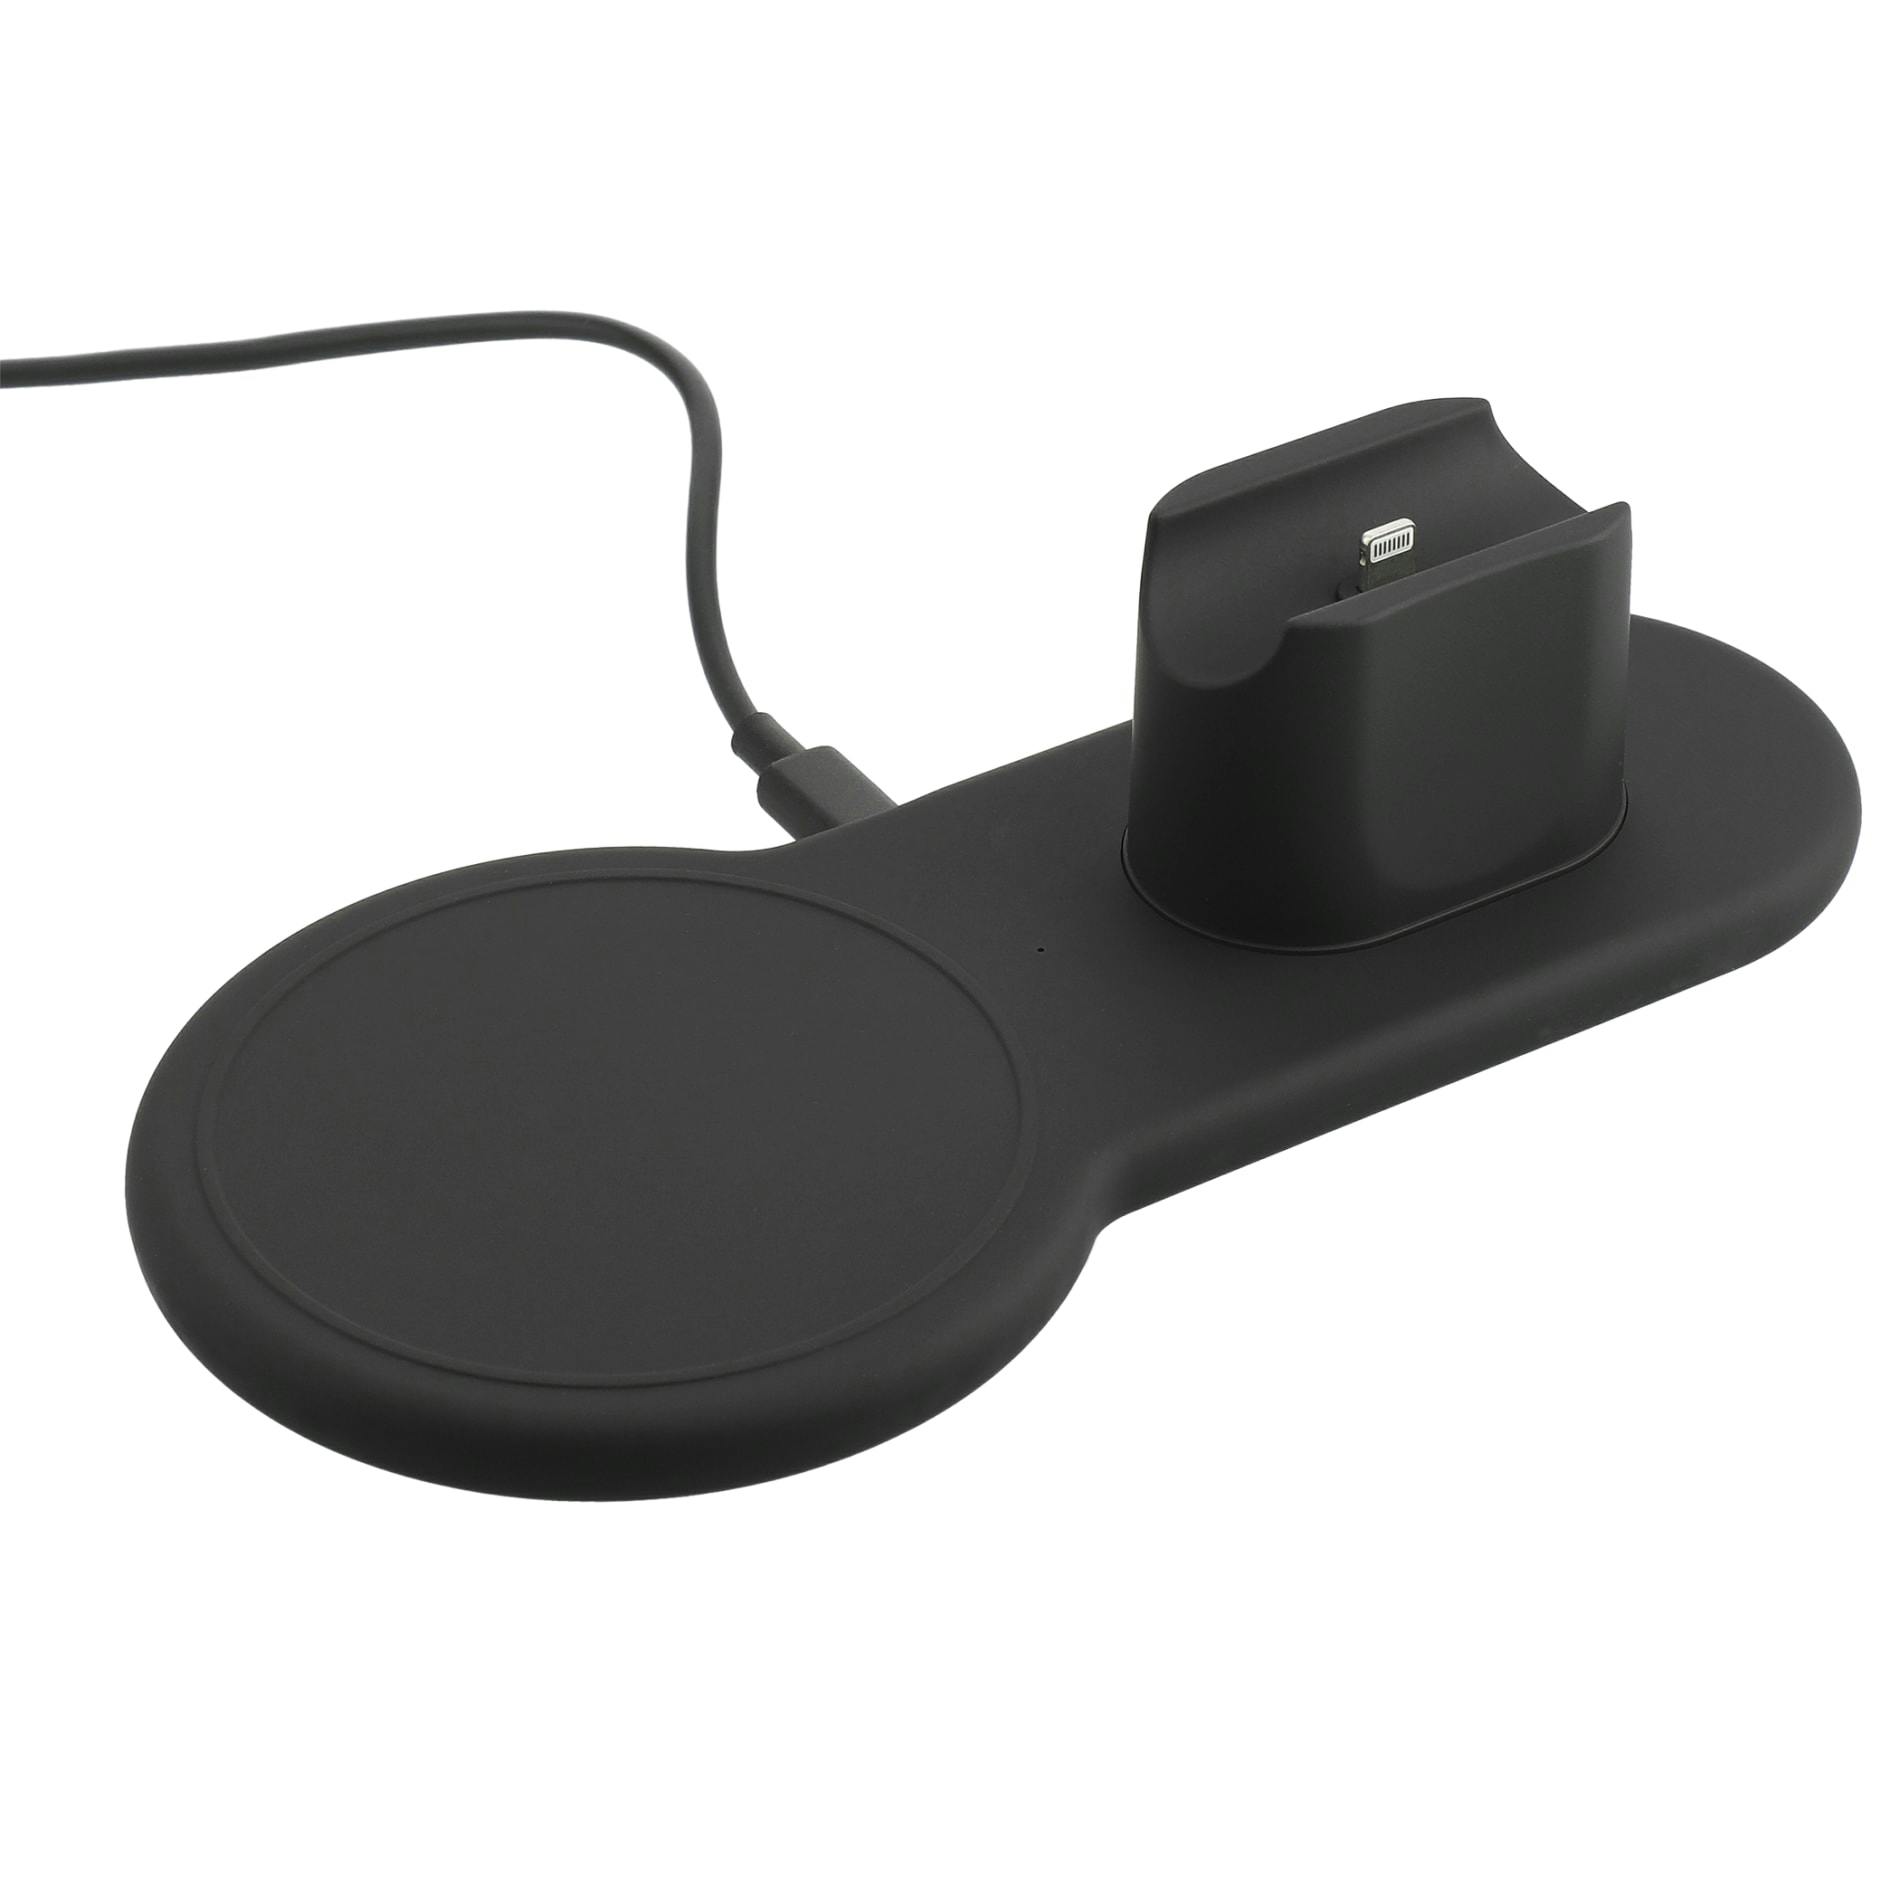 Trio Wireless Charging Stand - additional Image 2